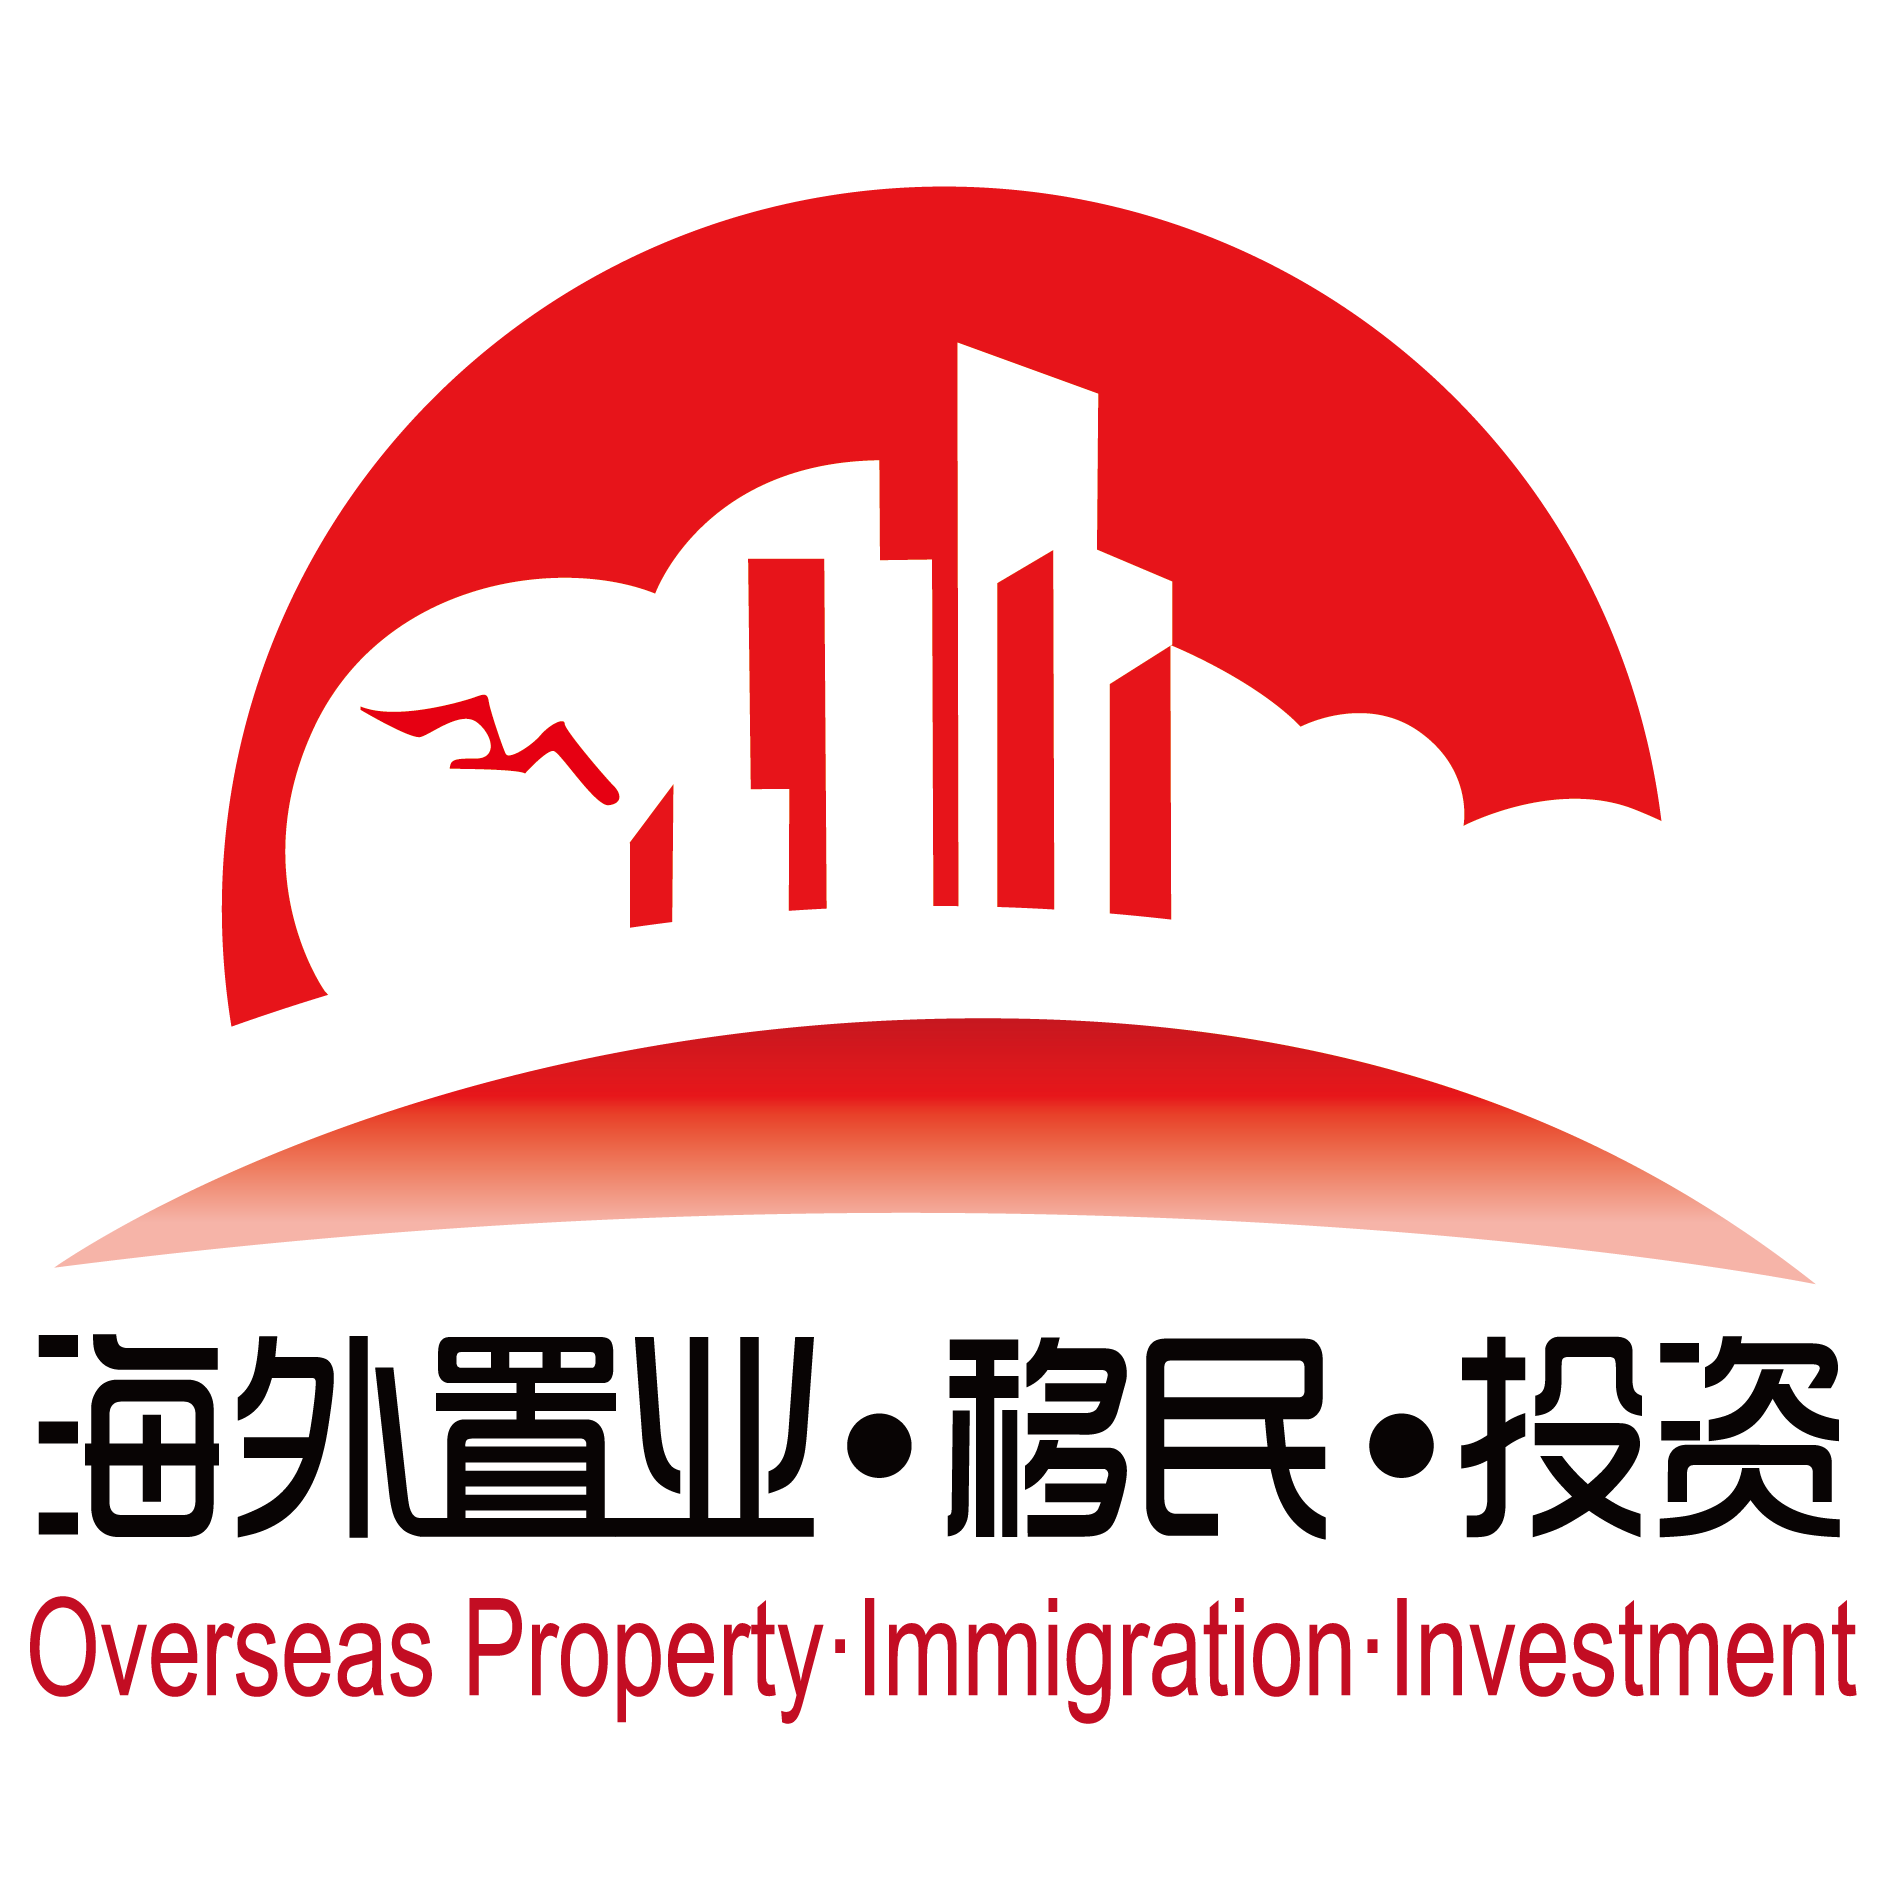 Wise 19th Overseas Property & Immigration & Investment Exhibition, Pudong New District, Shanghai, China